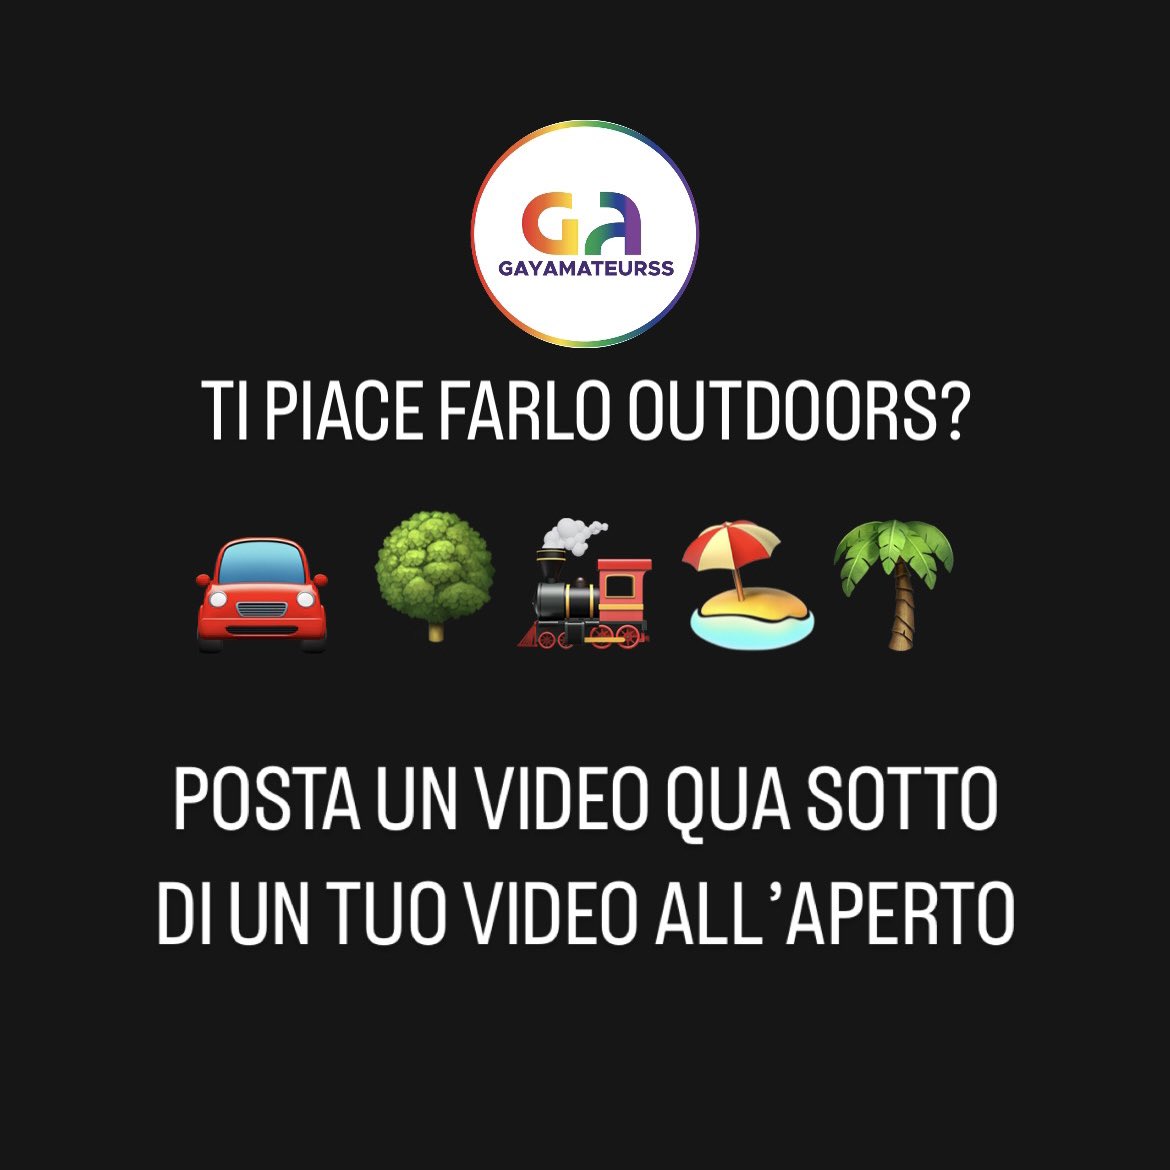 𝗩𝗜𝗗𝗘𝗢 = 𝗥𝗘𝗧𝗪𝗘𝗘𝗧 💦💦 Post an outdoor video of yours 😈 🚘 🌳 🚂 🏖️ 🌴 ▶️ @gaysexinpublic